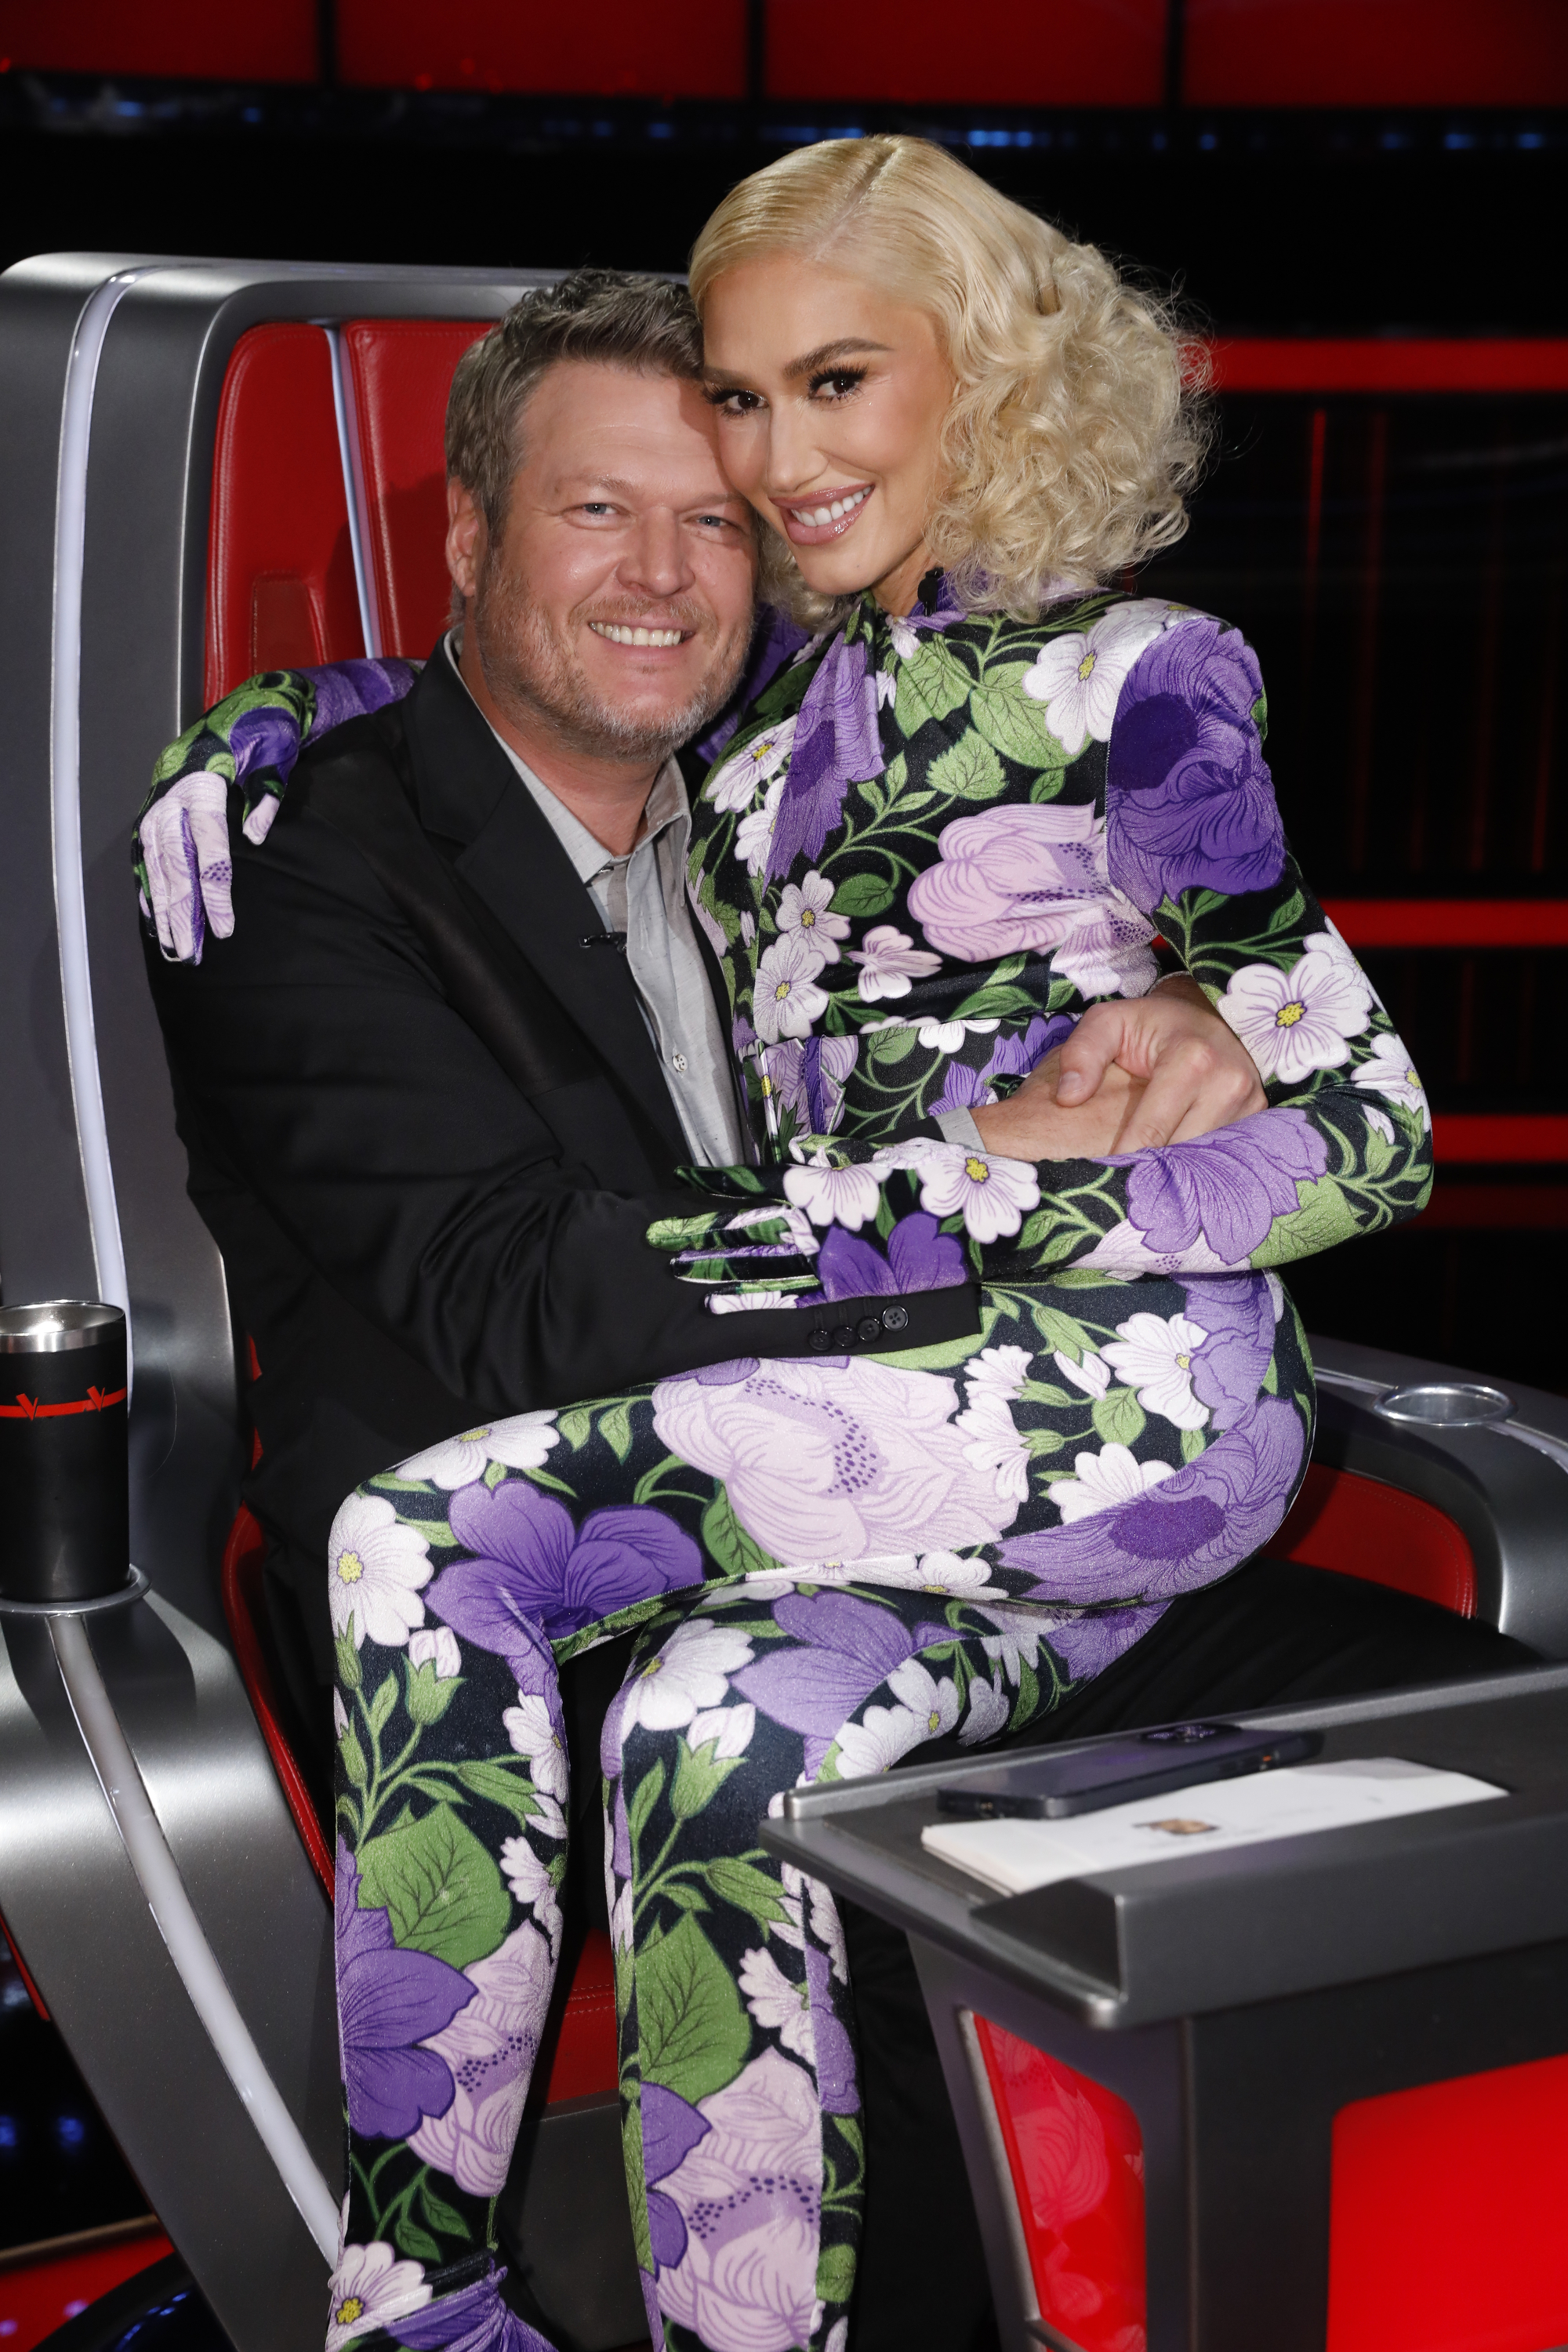 Blake and Gwen tied the knot in 2021